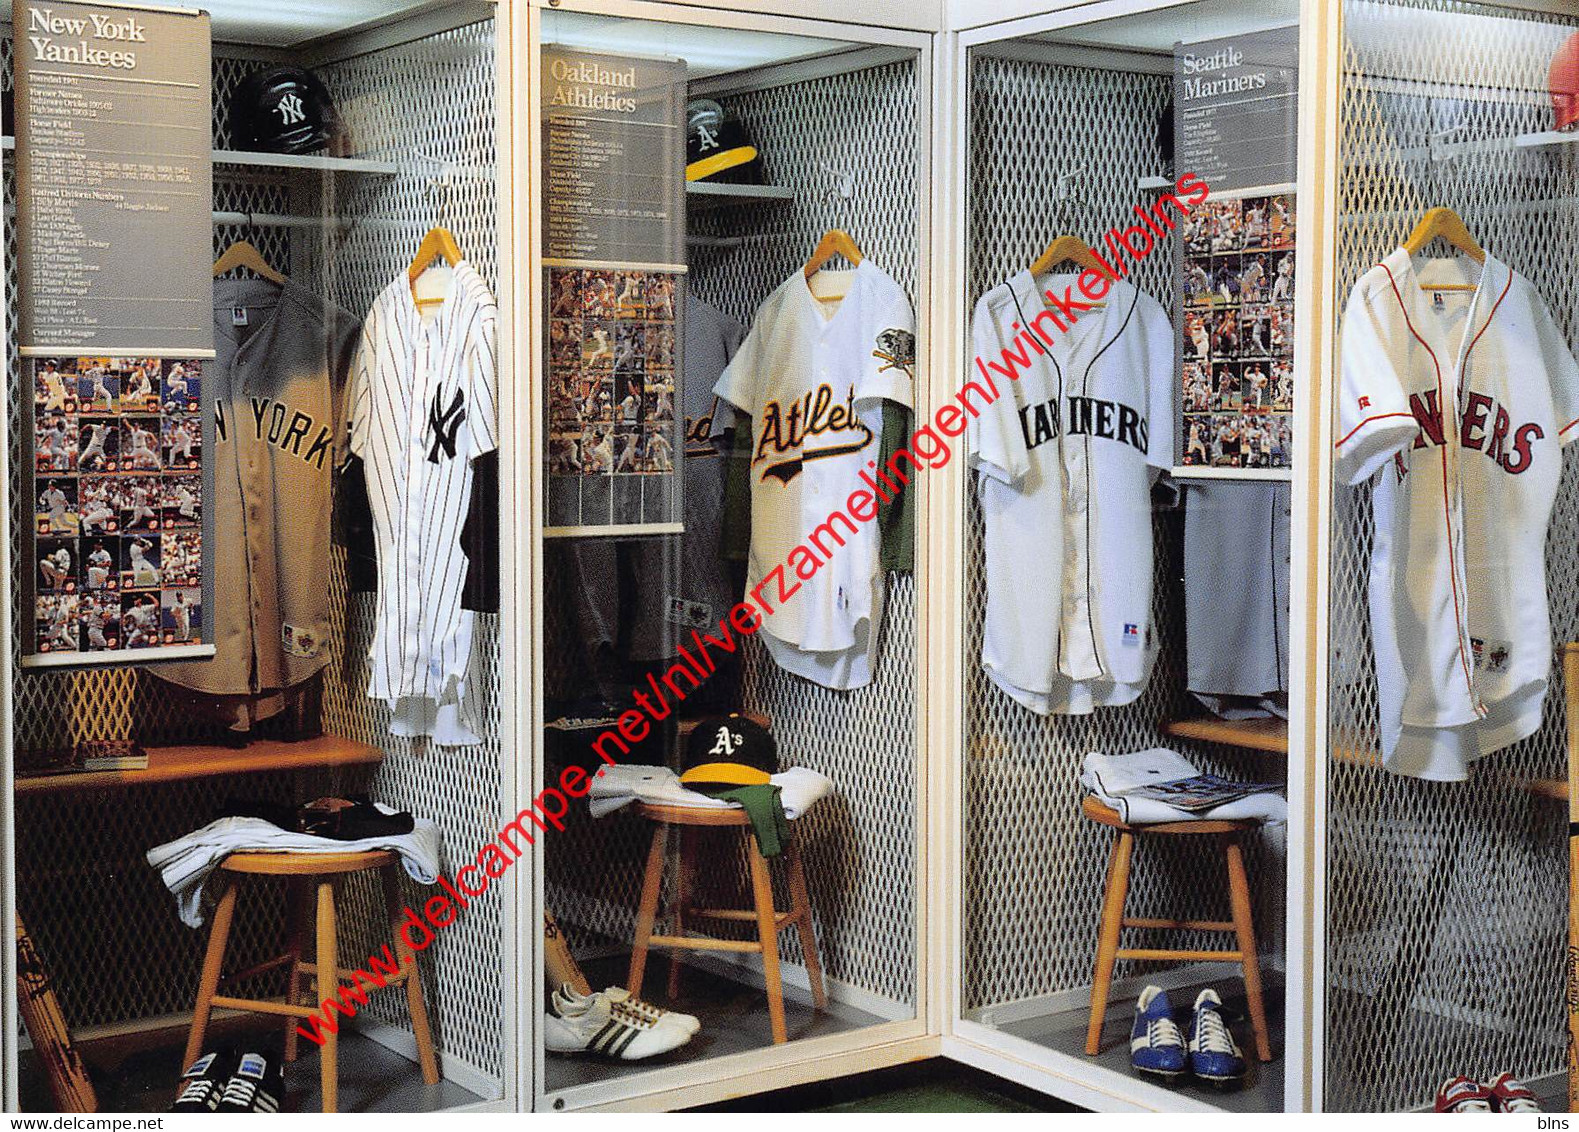 Today's Locker Room - The National Baseball Hall Of Fame And Museum - Cooperstown New York - Baseball